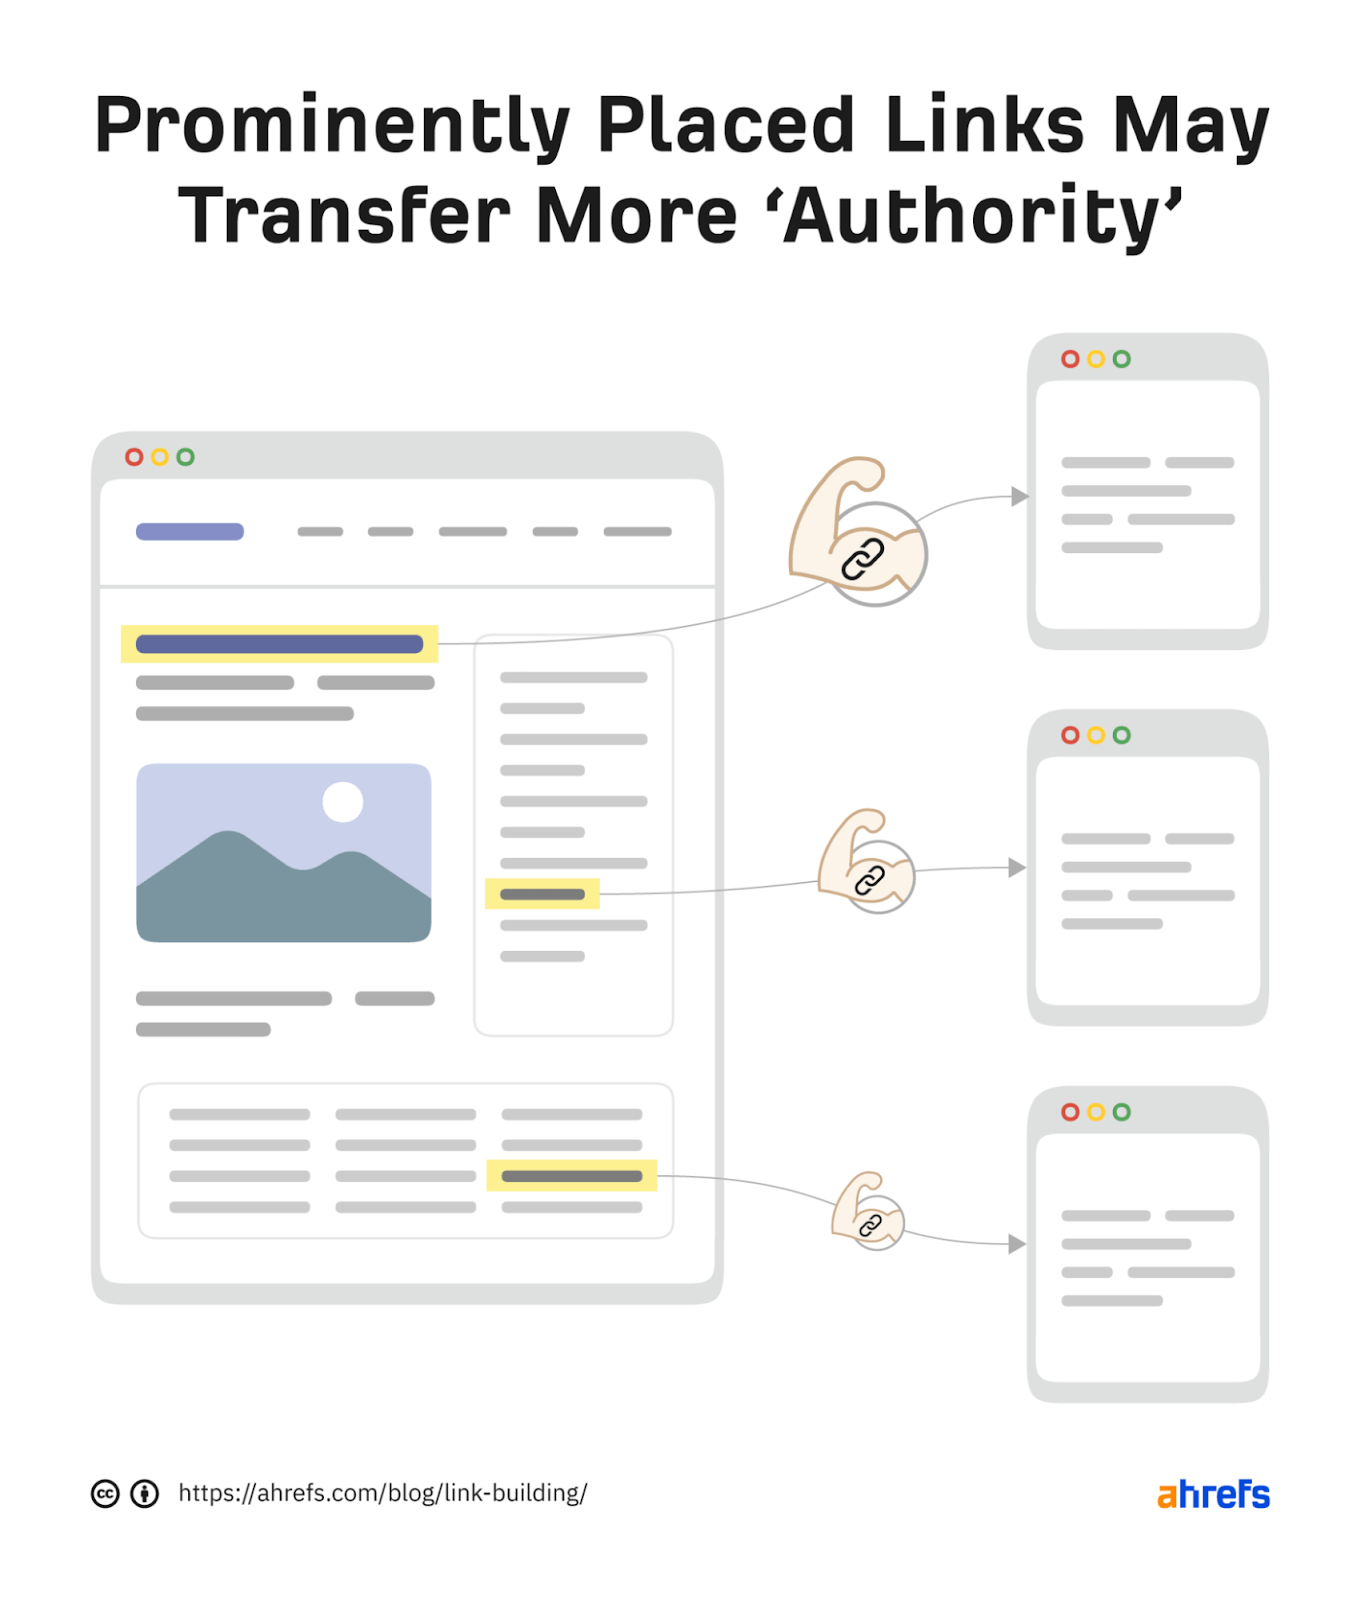 Infographic of article with 3 links. The biggest muscular arm connects most prominent link to another article (implying the most authority passed)